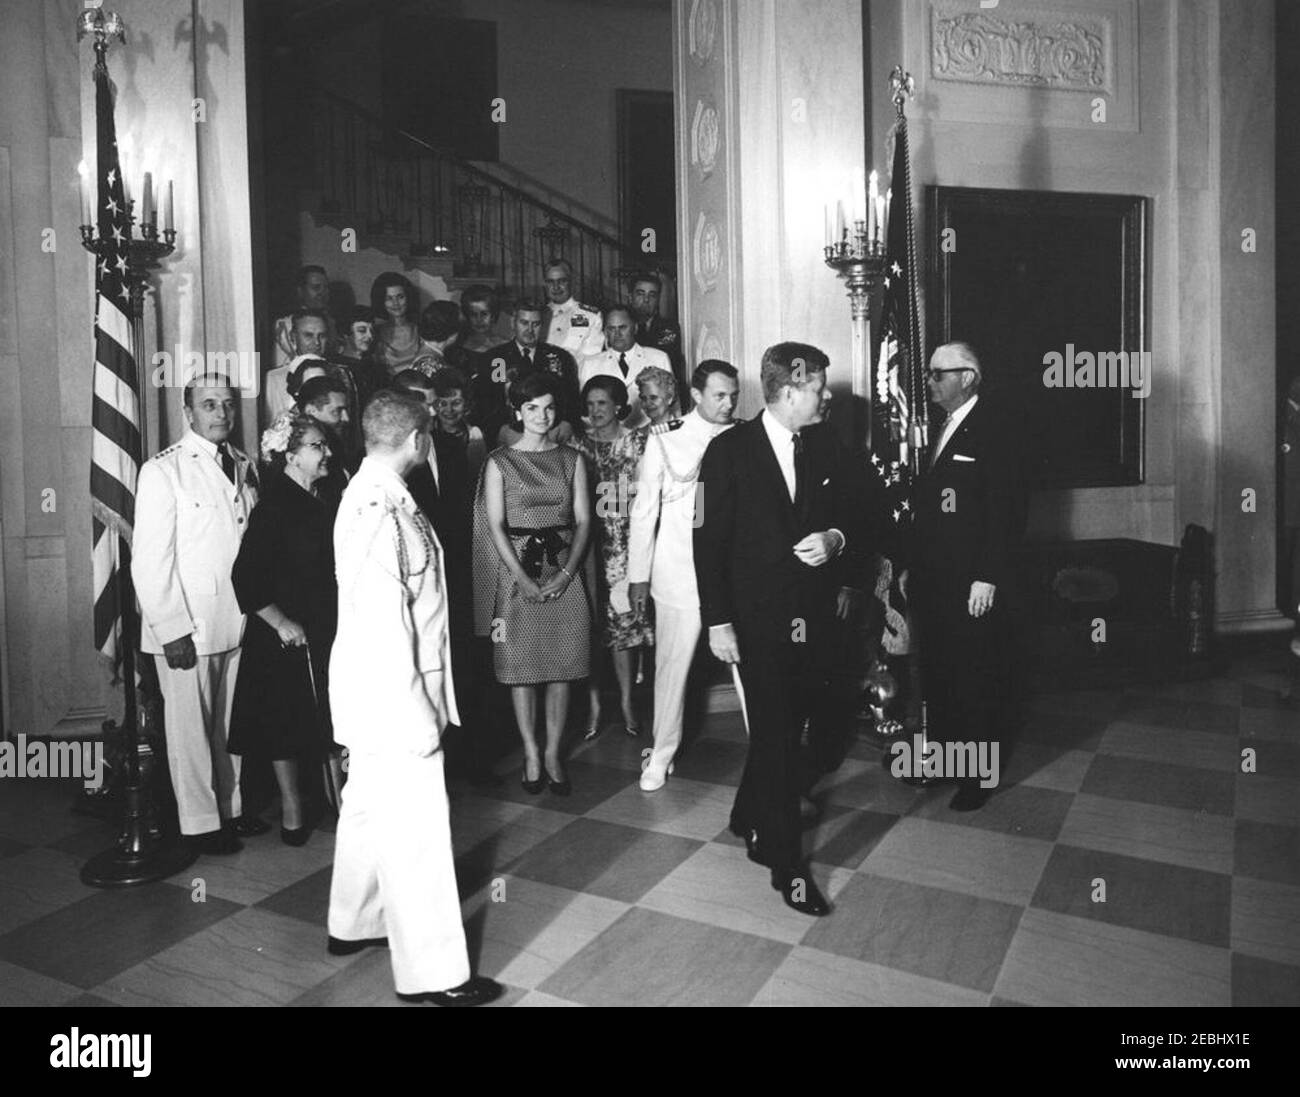 Military Reception at the White House, 6:00PM. President John F. Kennedy and others attend a military reception at the White House. Those pictured include: First Lady Jacqueline Kennedy; Chairman of the Joint Chiefs of Staff, General Lyman L. Lemnitzer, and his wife, Katherine Lemnitzer; Secretary of the Army, Elvis J. Stahr, Jr., and his wife, Dorothy Stahr; Secretary of Defense, Robert S. McNamara; Secretary of the Navy, Fred Korth, and his wife, Vera Korth; General Maxwell D. Taylor and his wife, Lydia Taylor; Military Aide to the President, General Chester V. Clifton, and his wife, Anne Bo Stock Photo